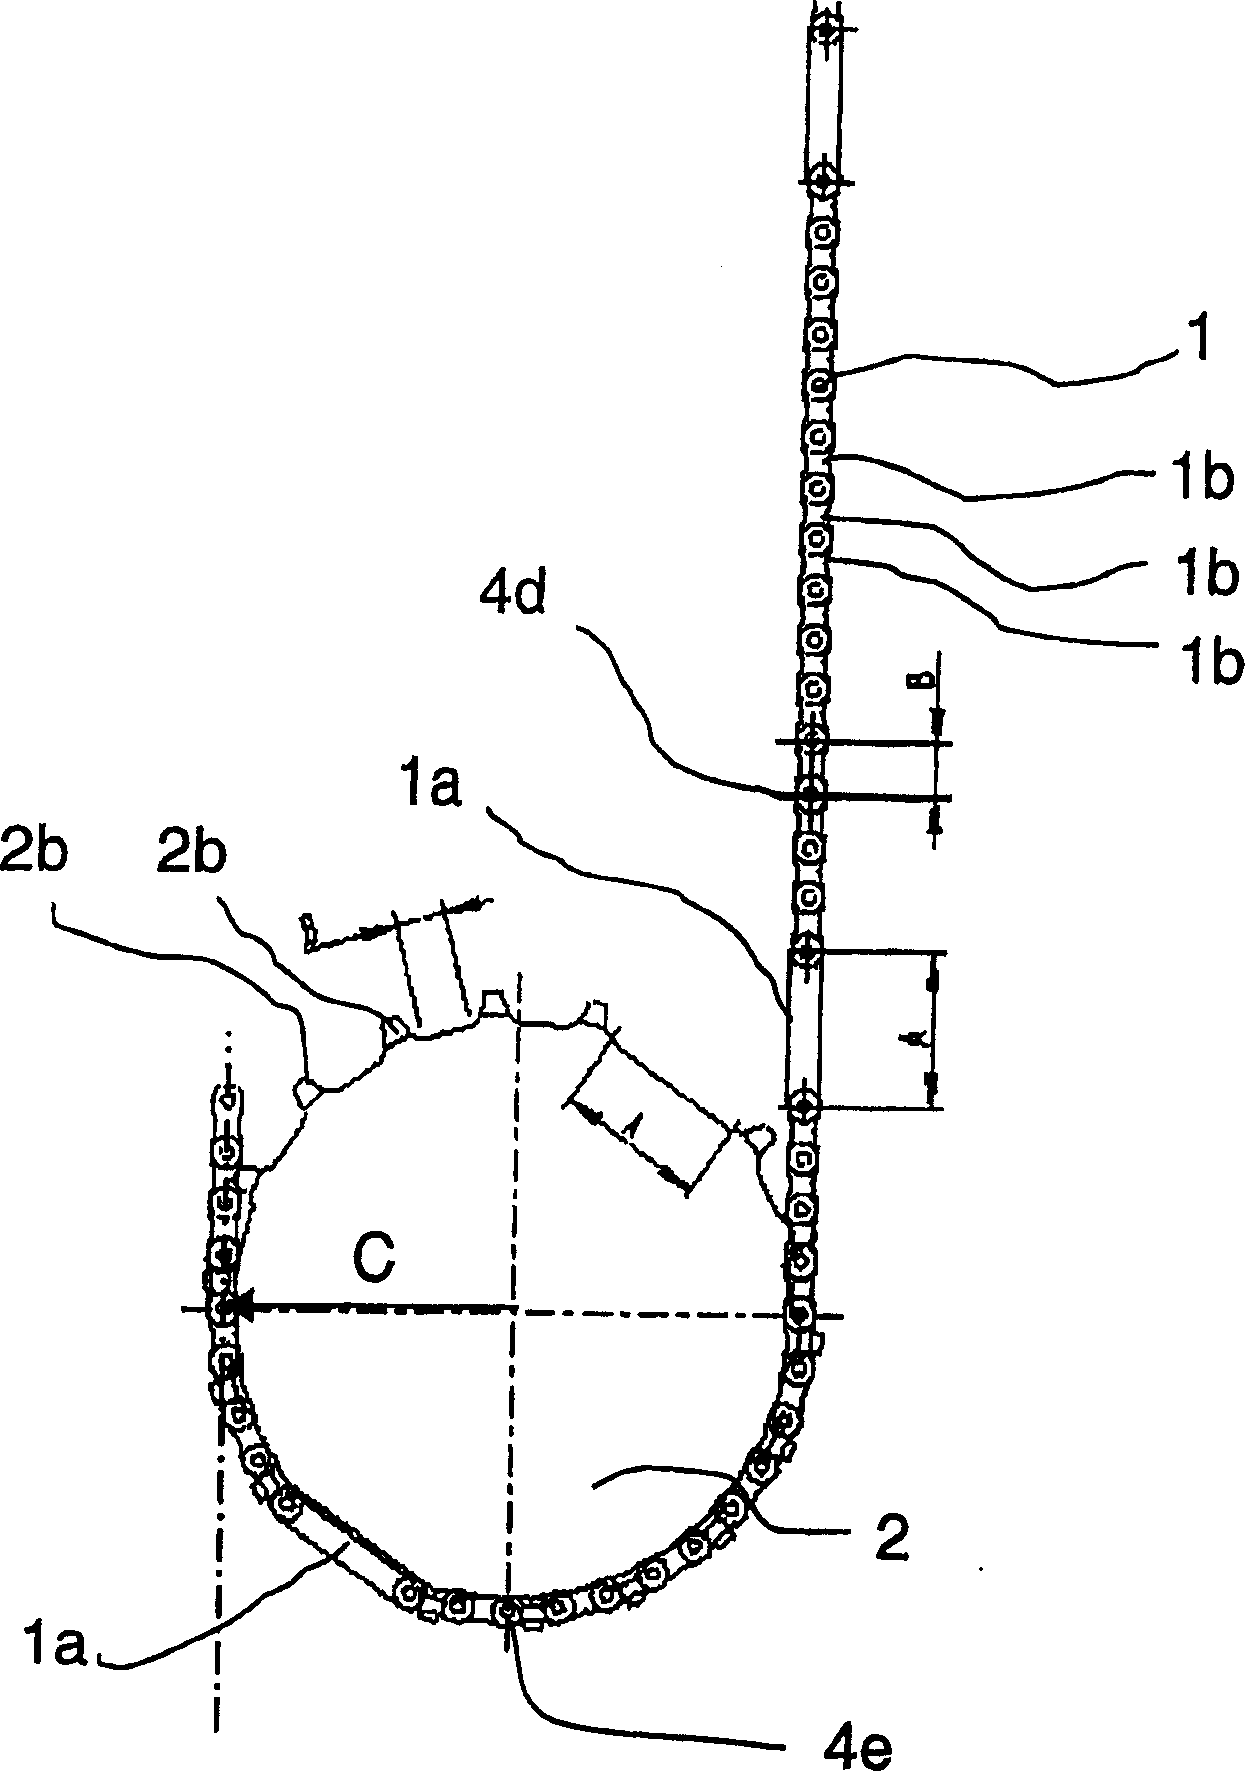 An apparatus for driving one or more processing stations, and a chain for use in the apparatus